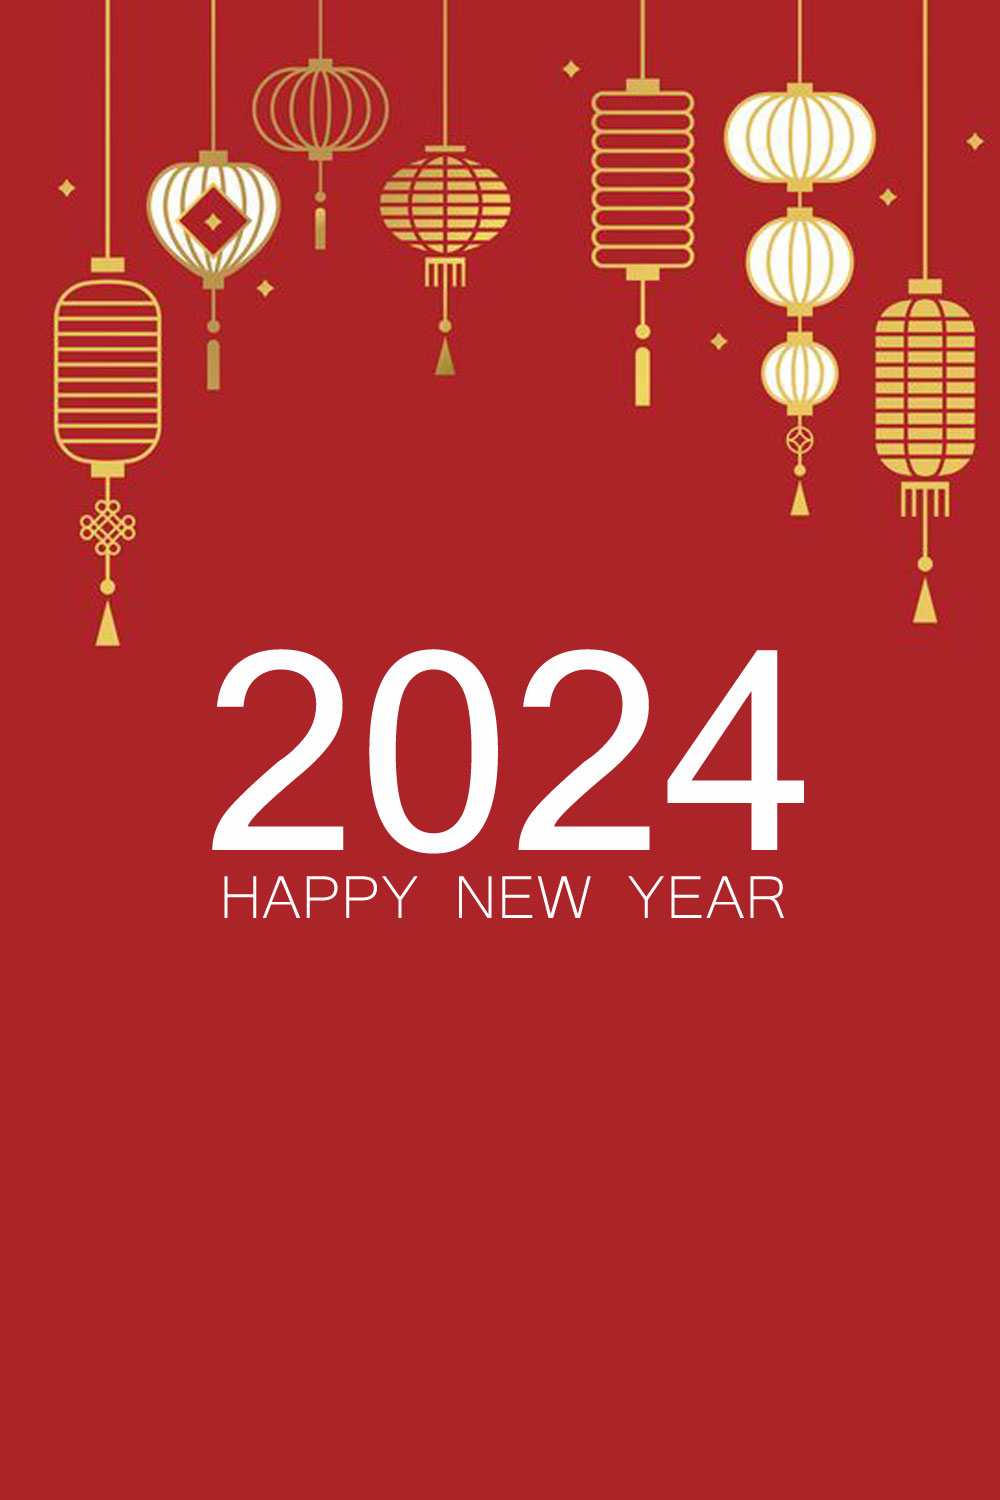 Happy New Year 2024 English Wallpaper Image Birthday Wishes, Memes, SMS & Greeting eCard Image